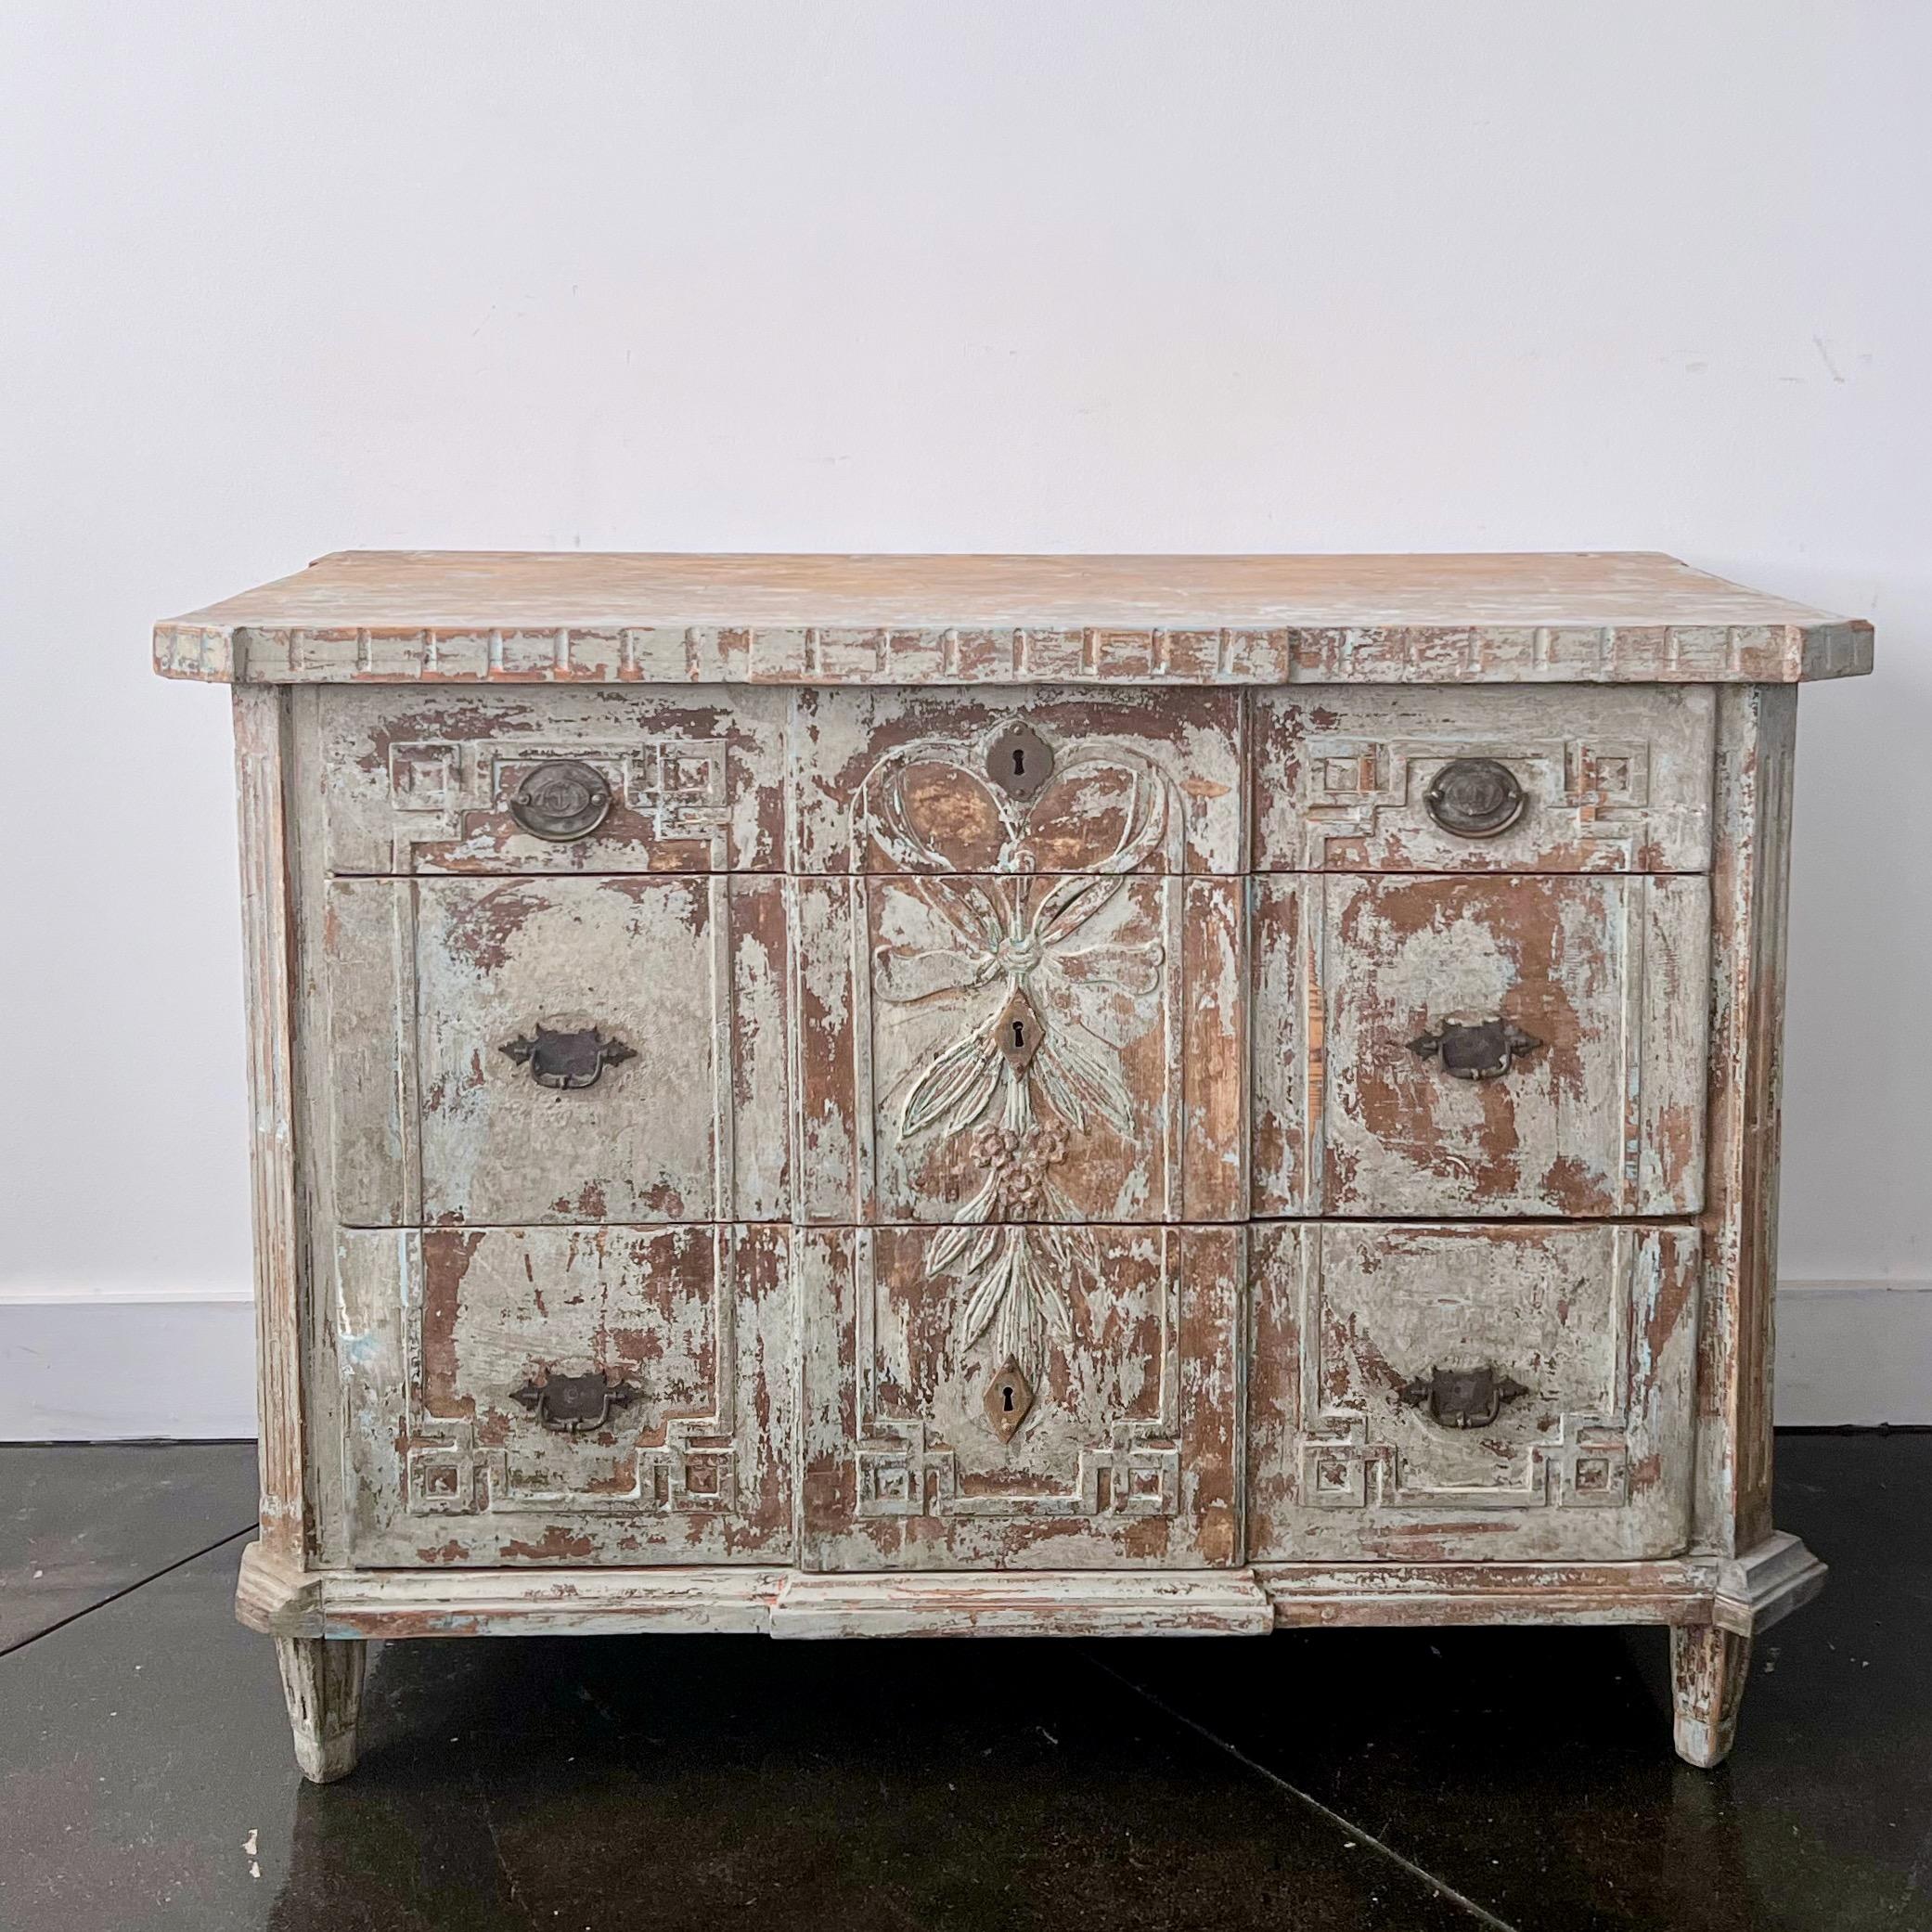 18th century ca 1780 three drawers Dutch chest in richly carved drawer fronts, original intricately detailed hardware and escutcheons, shaped top, handsome original large iron handles on the side panels - Charmingly with remnants of white paint that